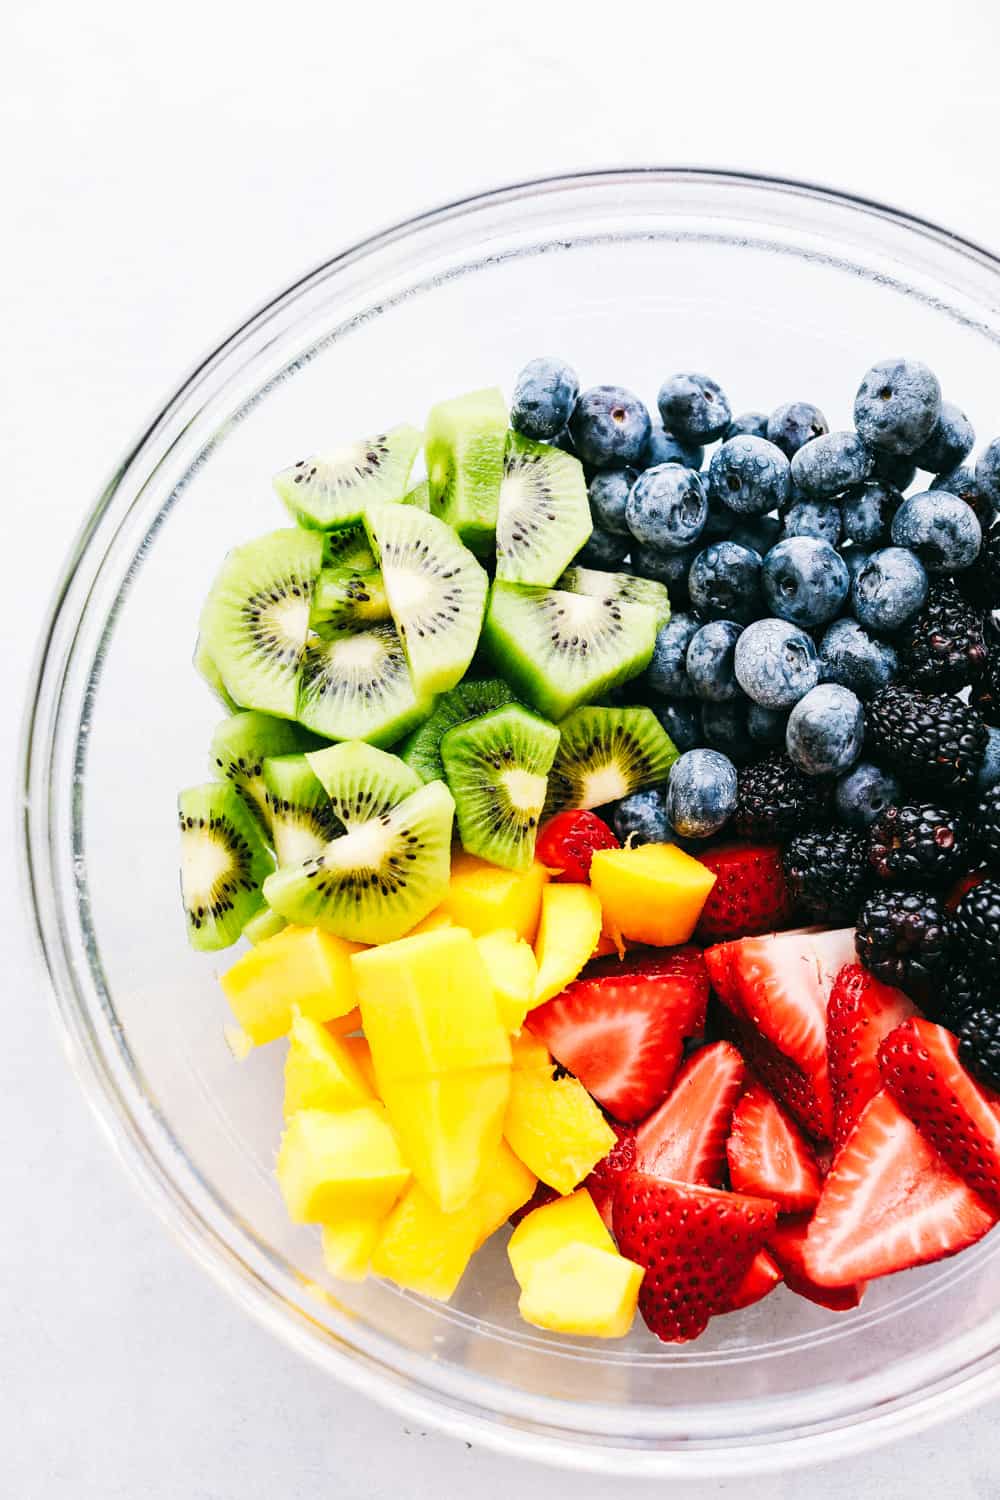 Fruit salad ingredients in a bowl before they are mixed.